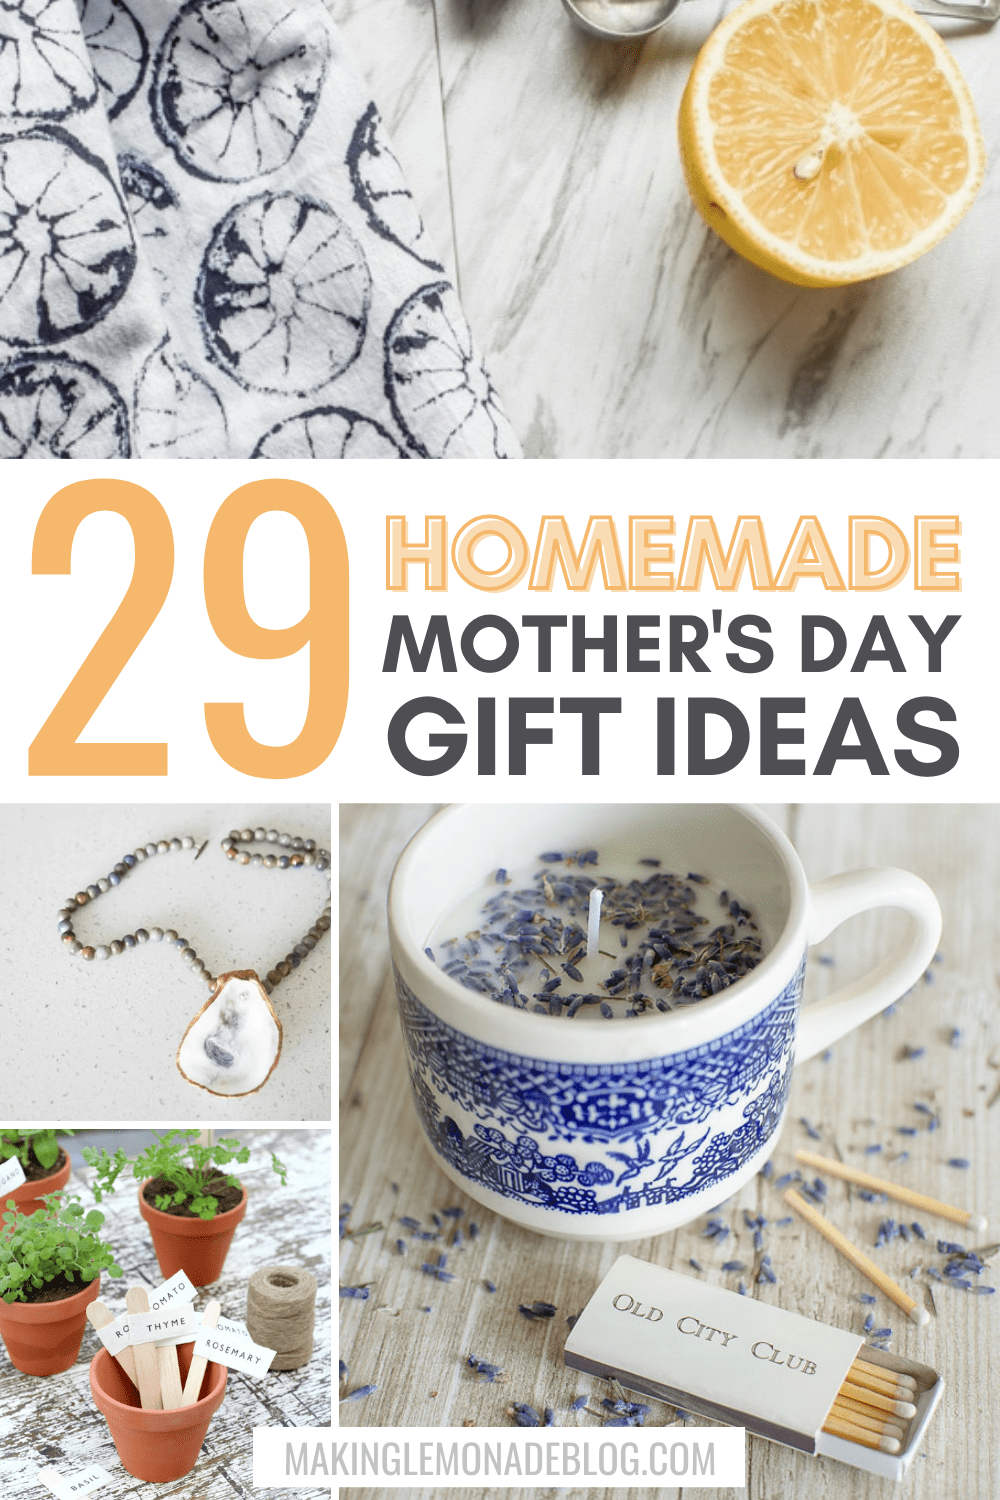 27 Homemade Gift Ideas for Mother's Day That She'll Totally Love